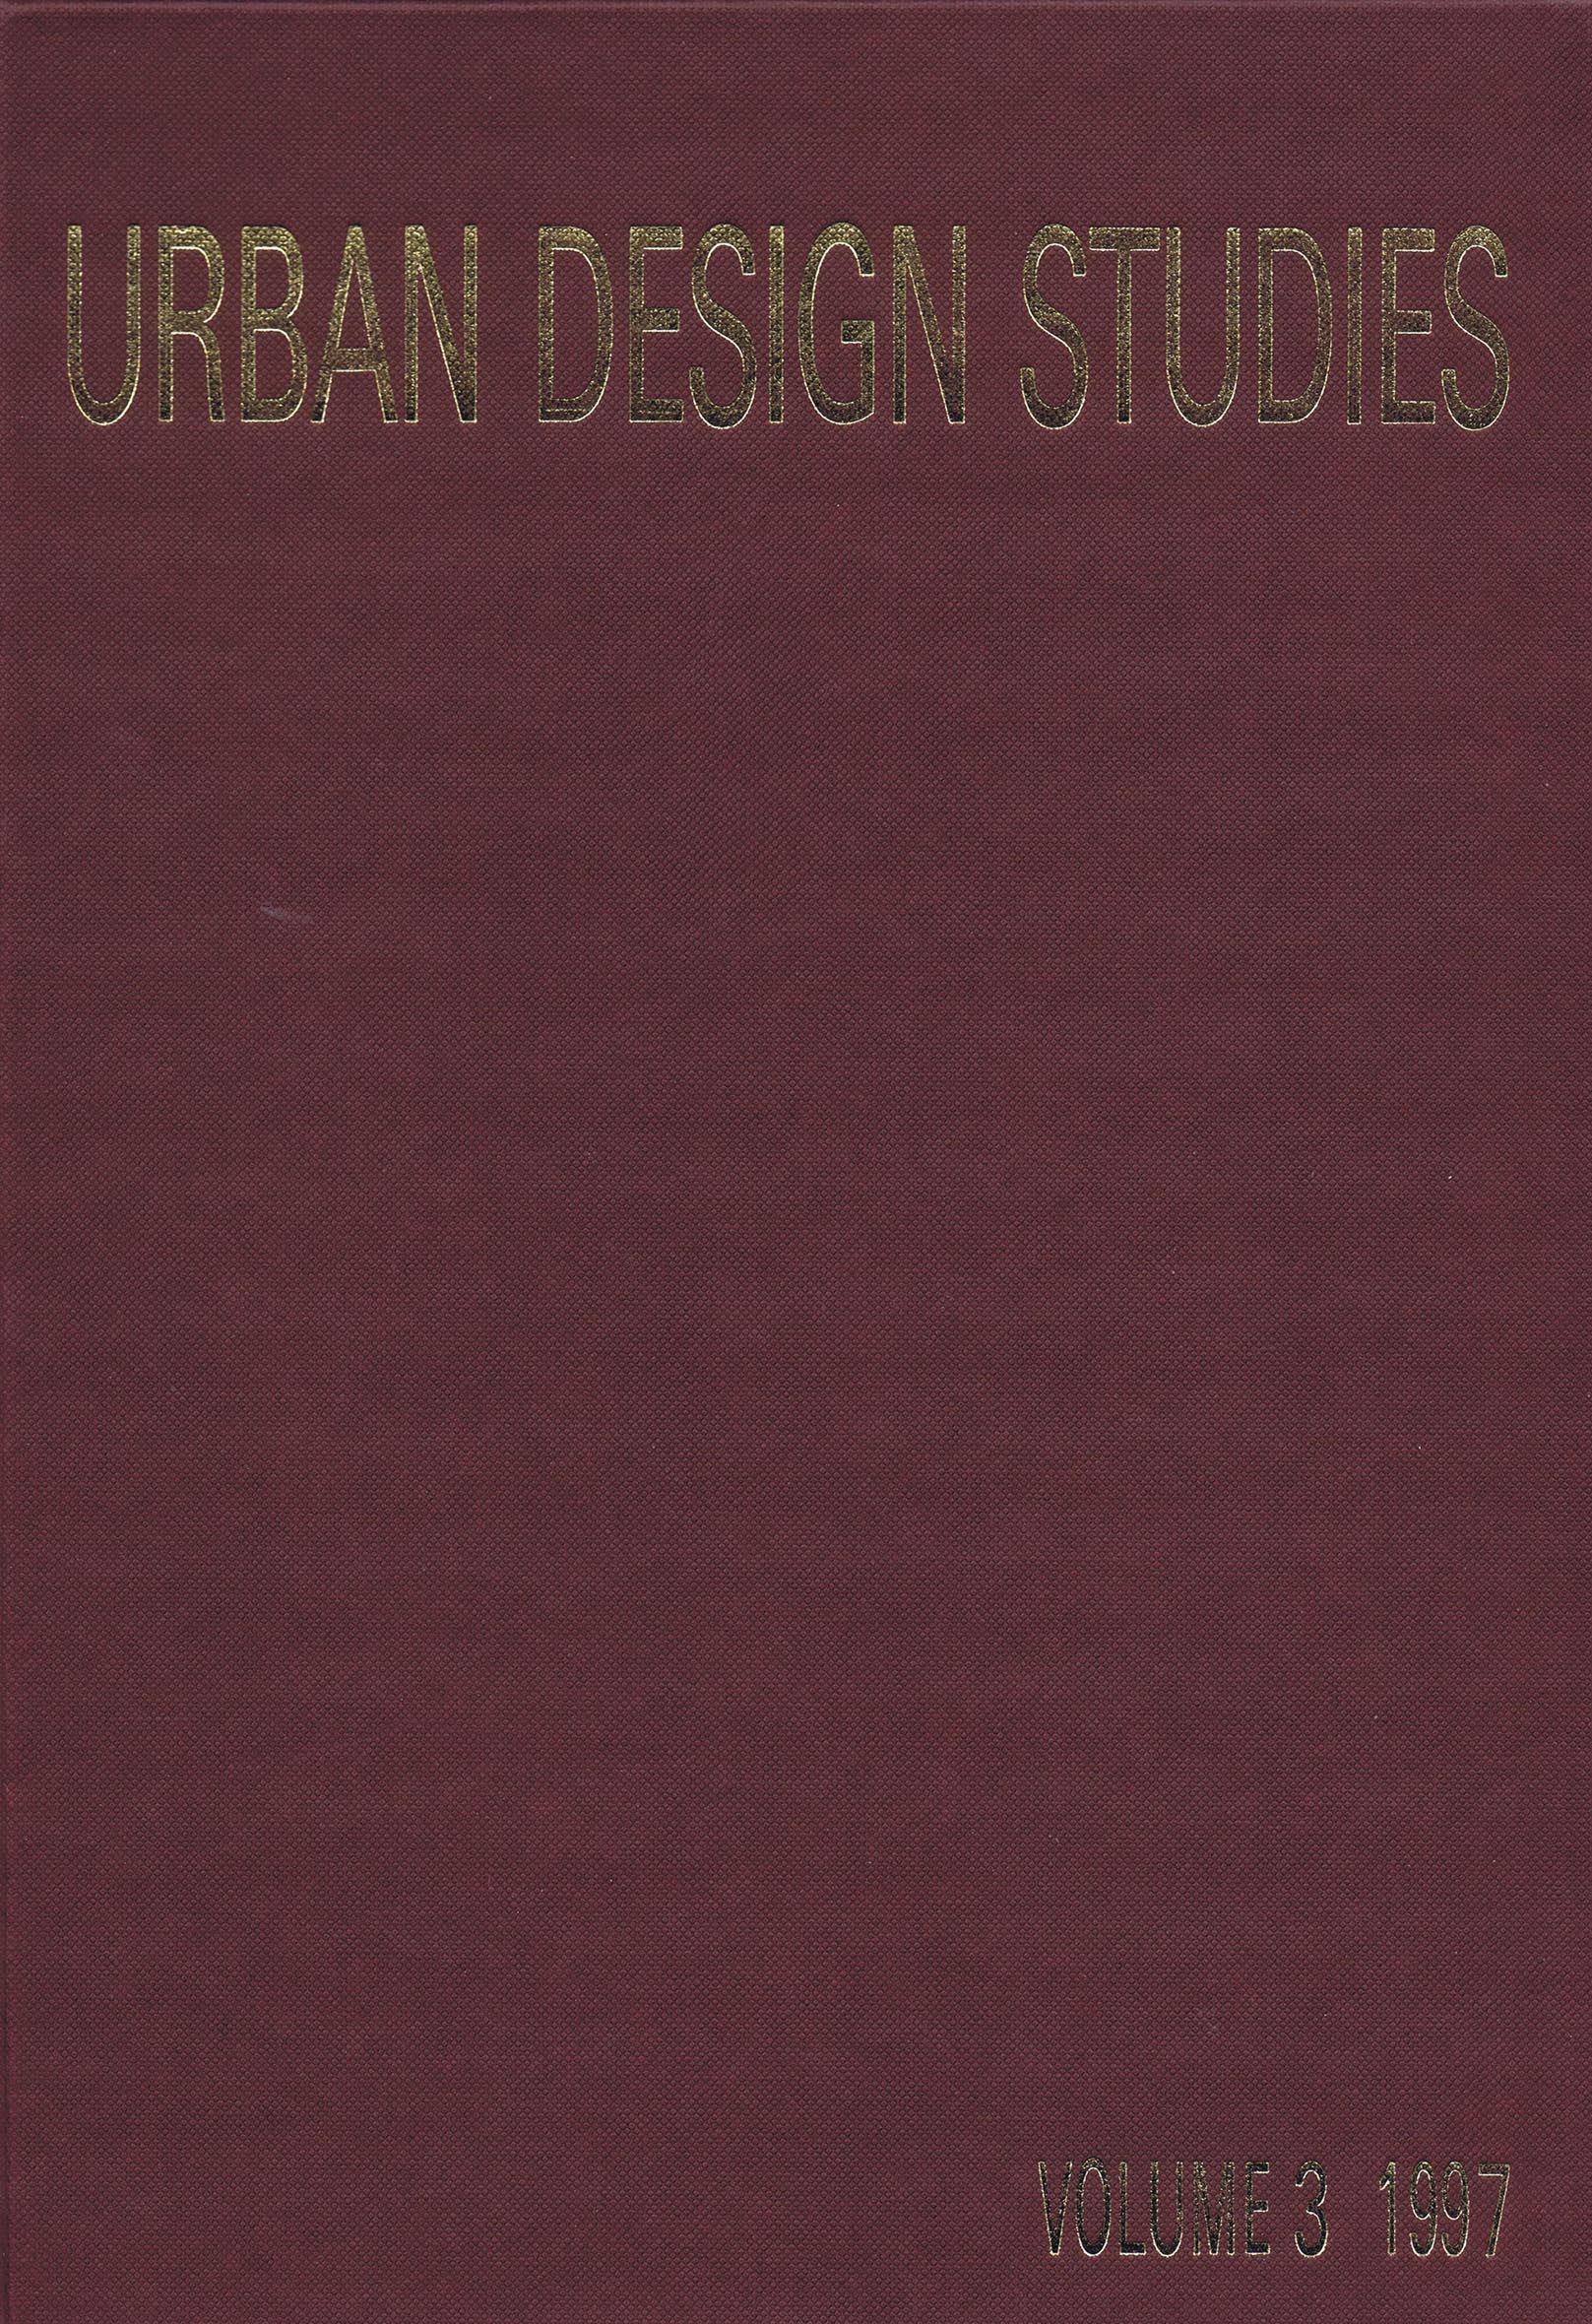 UDS_3_front_cover